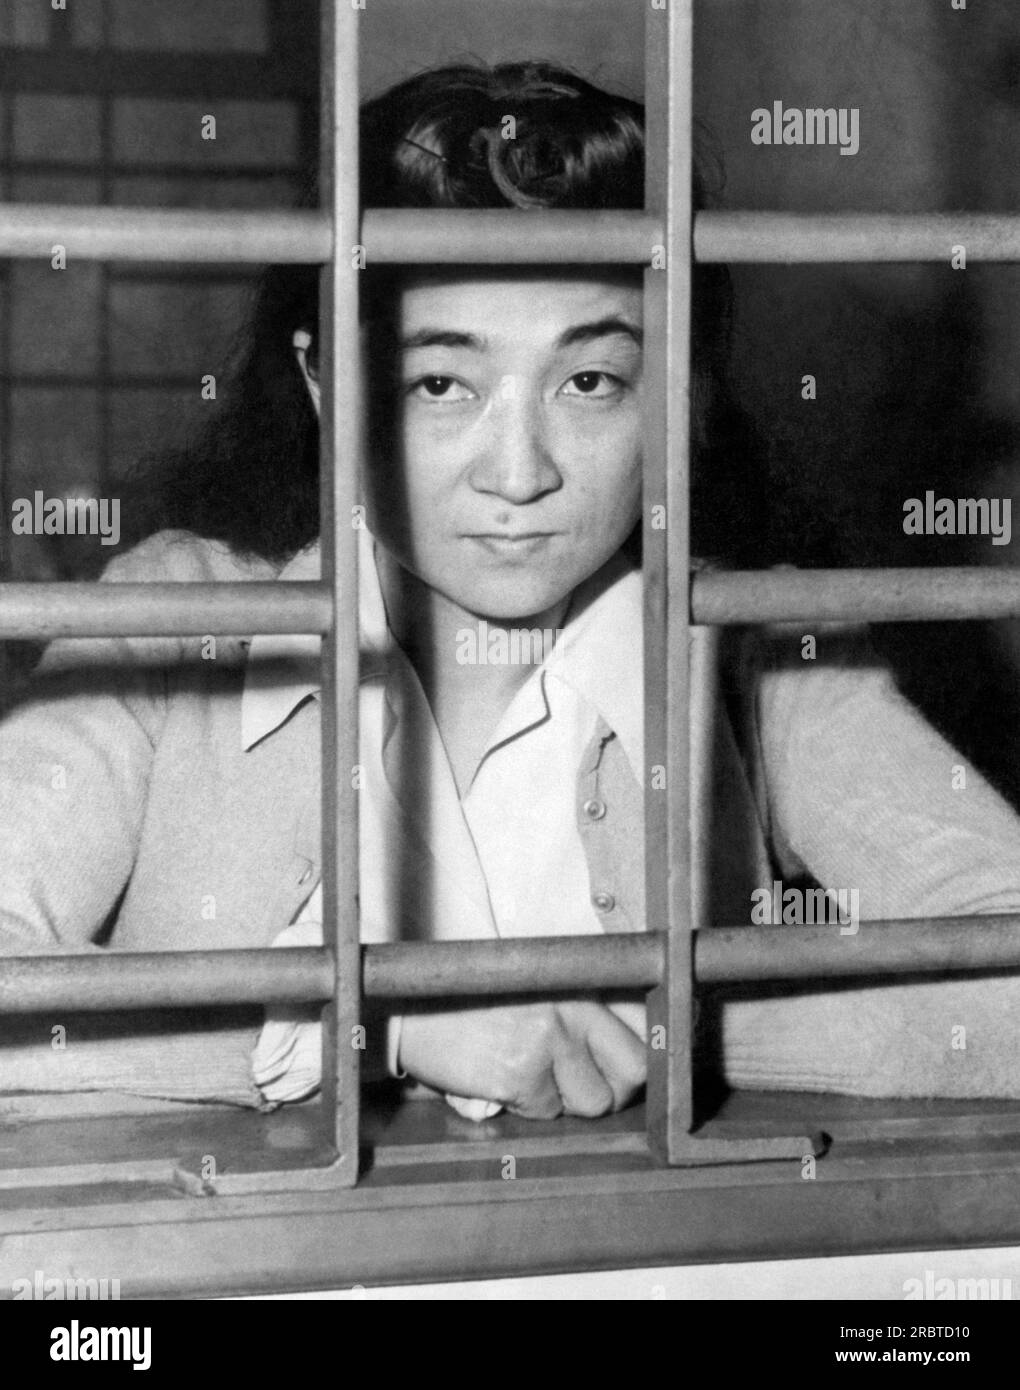 Yokohama, Japan, October 28, 1945 Iva Toguri, known as "Tokyo Rose" of the Japanese propaganda "Zero Hour" broadcasts which were beamed at U. S. troops in the Pacific during the war, as she looks through the bars of her cell. Born in Los Angeles in 1916, she is awaiting trial for treason against the United States. Stock Photo